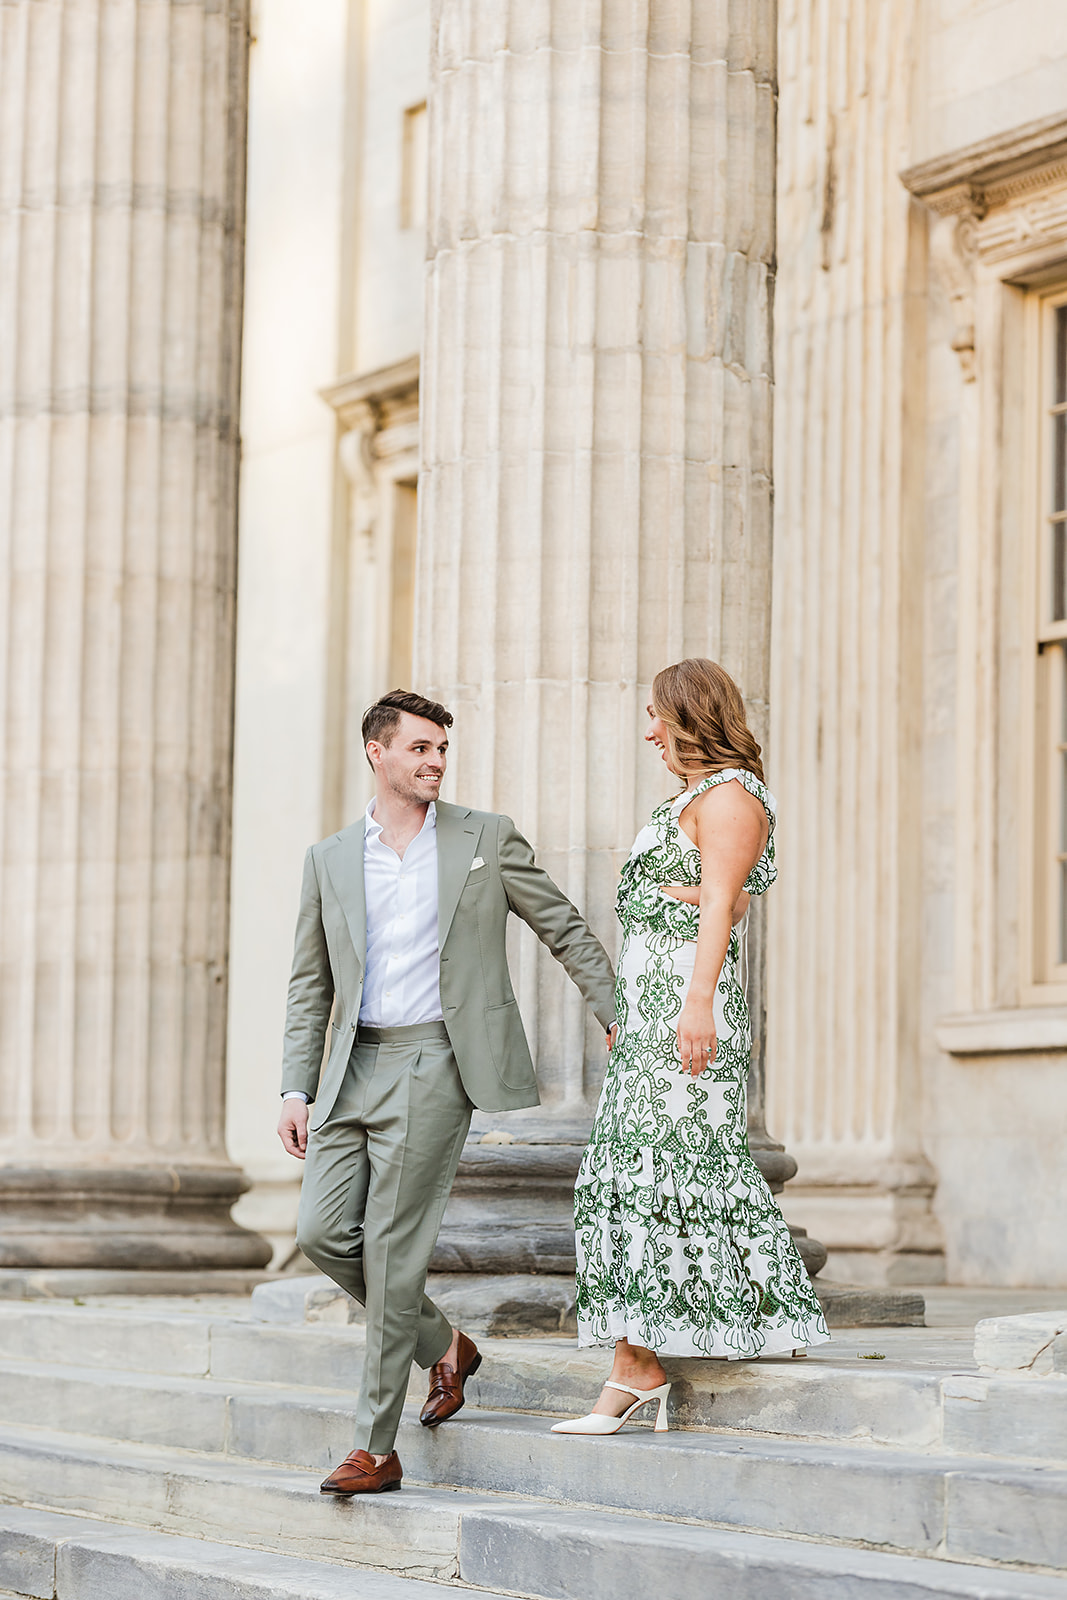 Candid engagement session photos in Old City Philadelphia at First National Bank